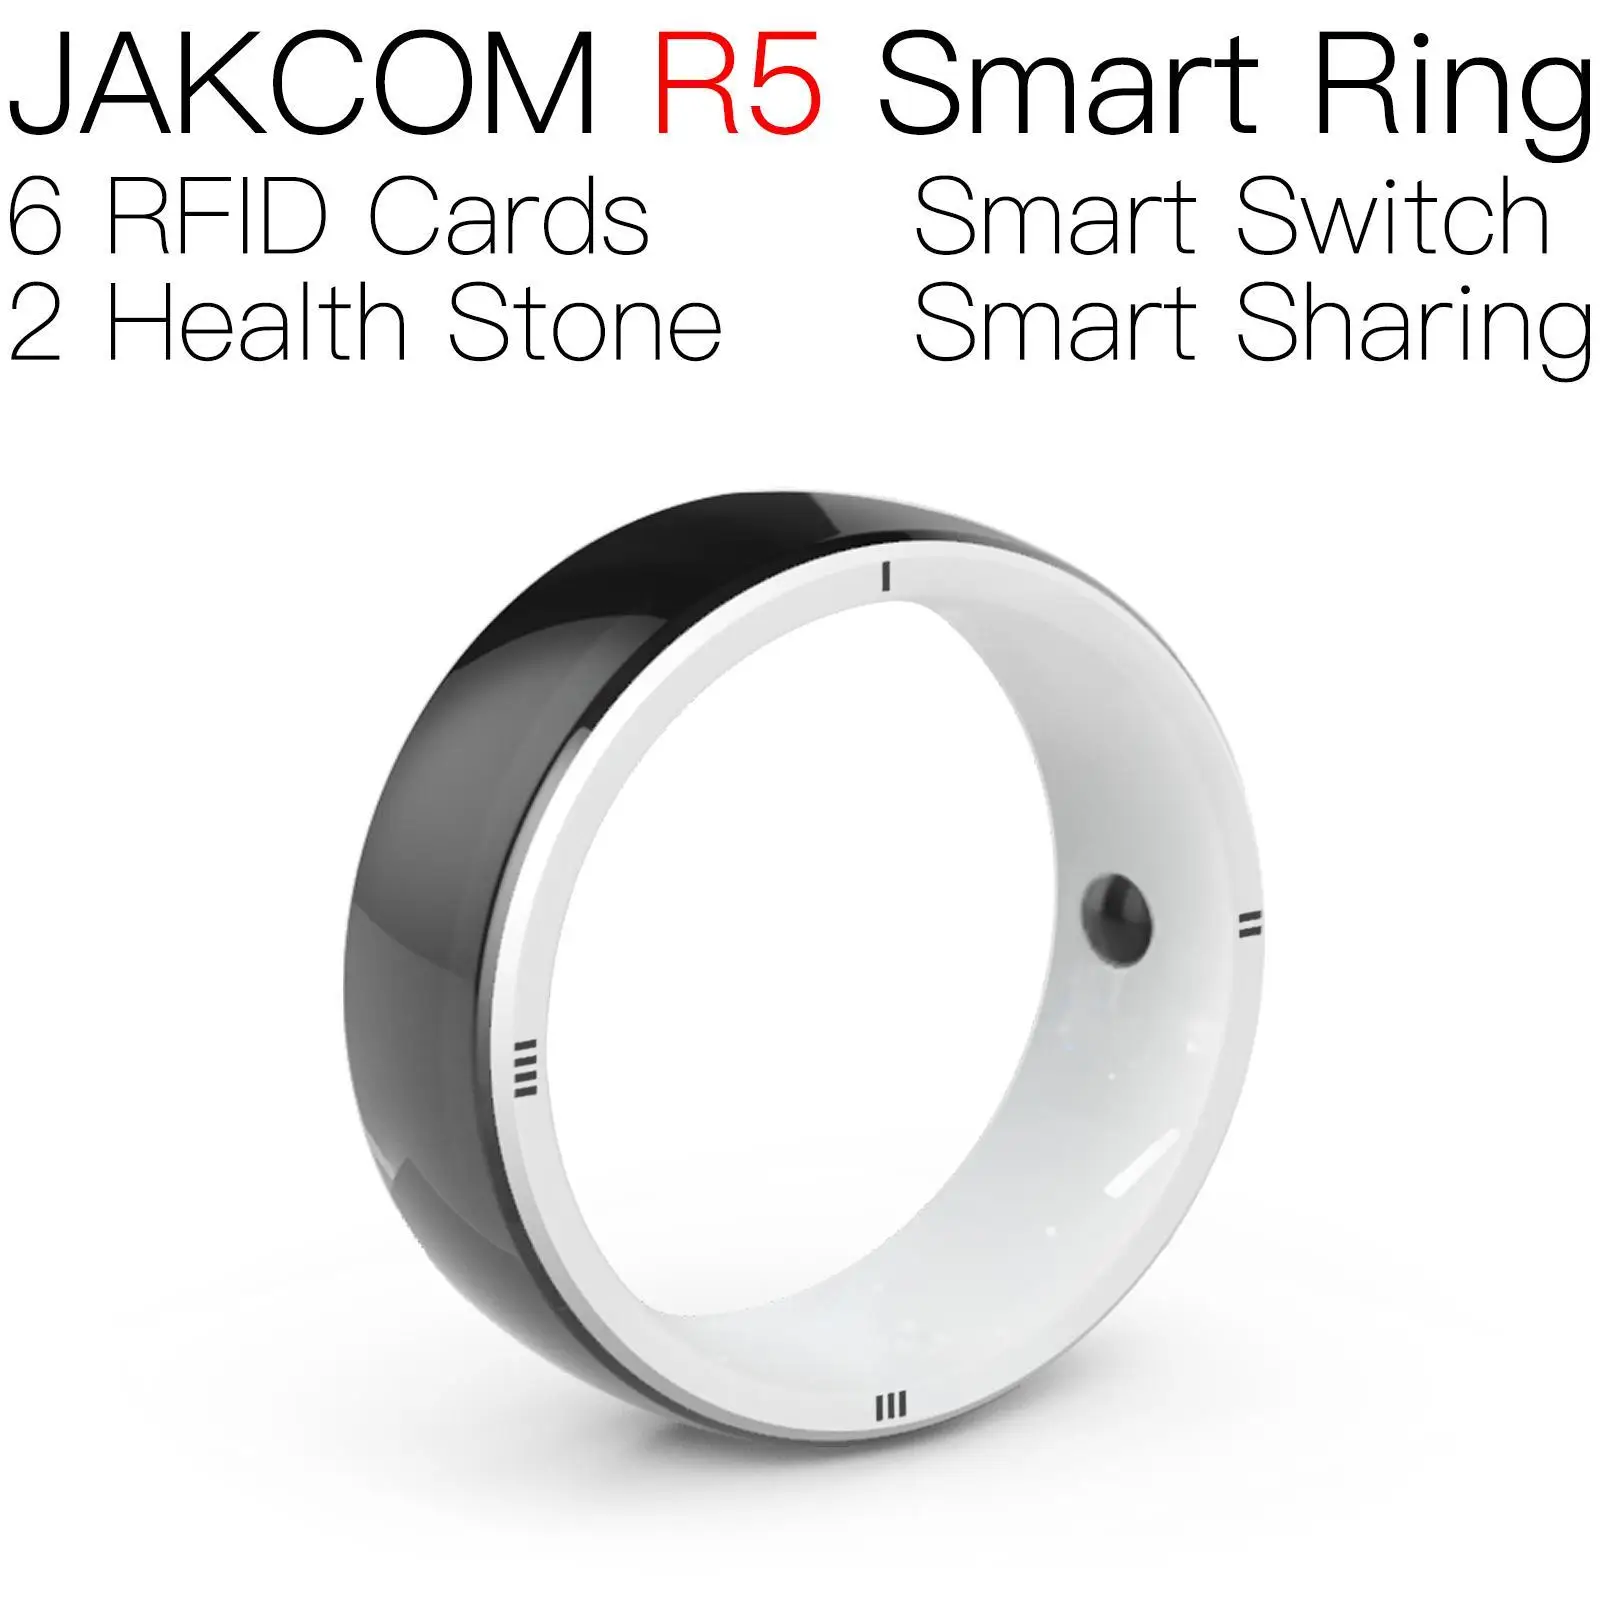 

JAKCOM R5 Smart Ring better than iso 14443a rfid nfc tag card printer poisson pour chat uhf running 125 proton gen 2 microchip